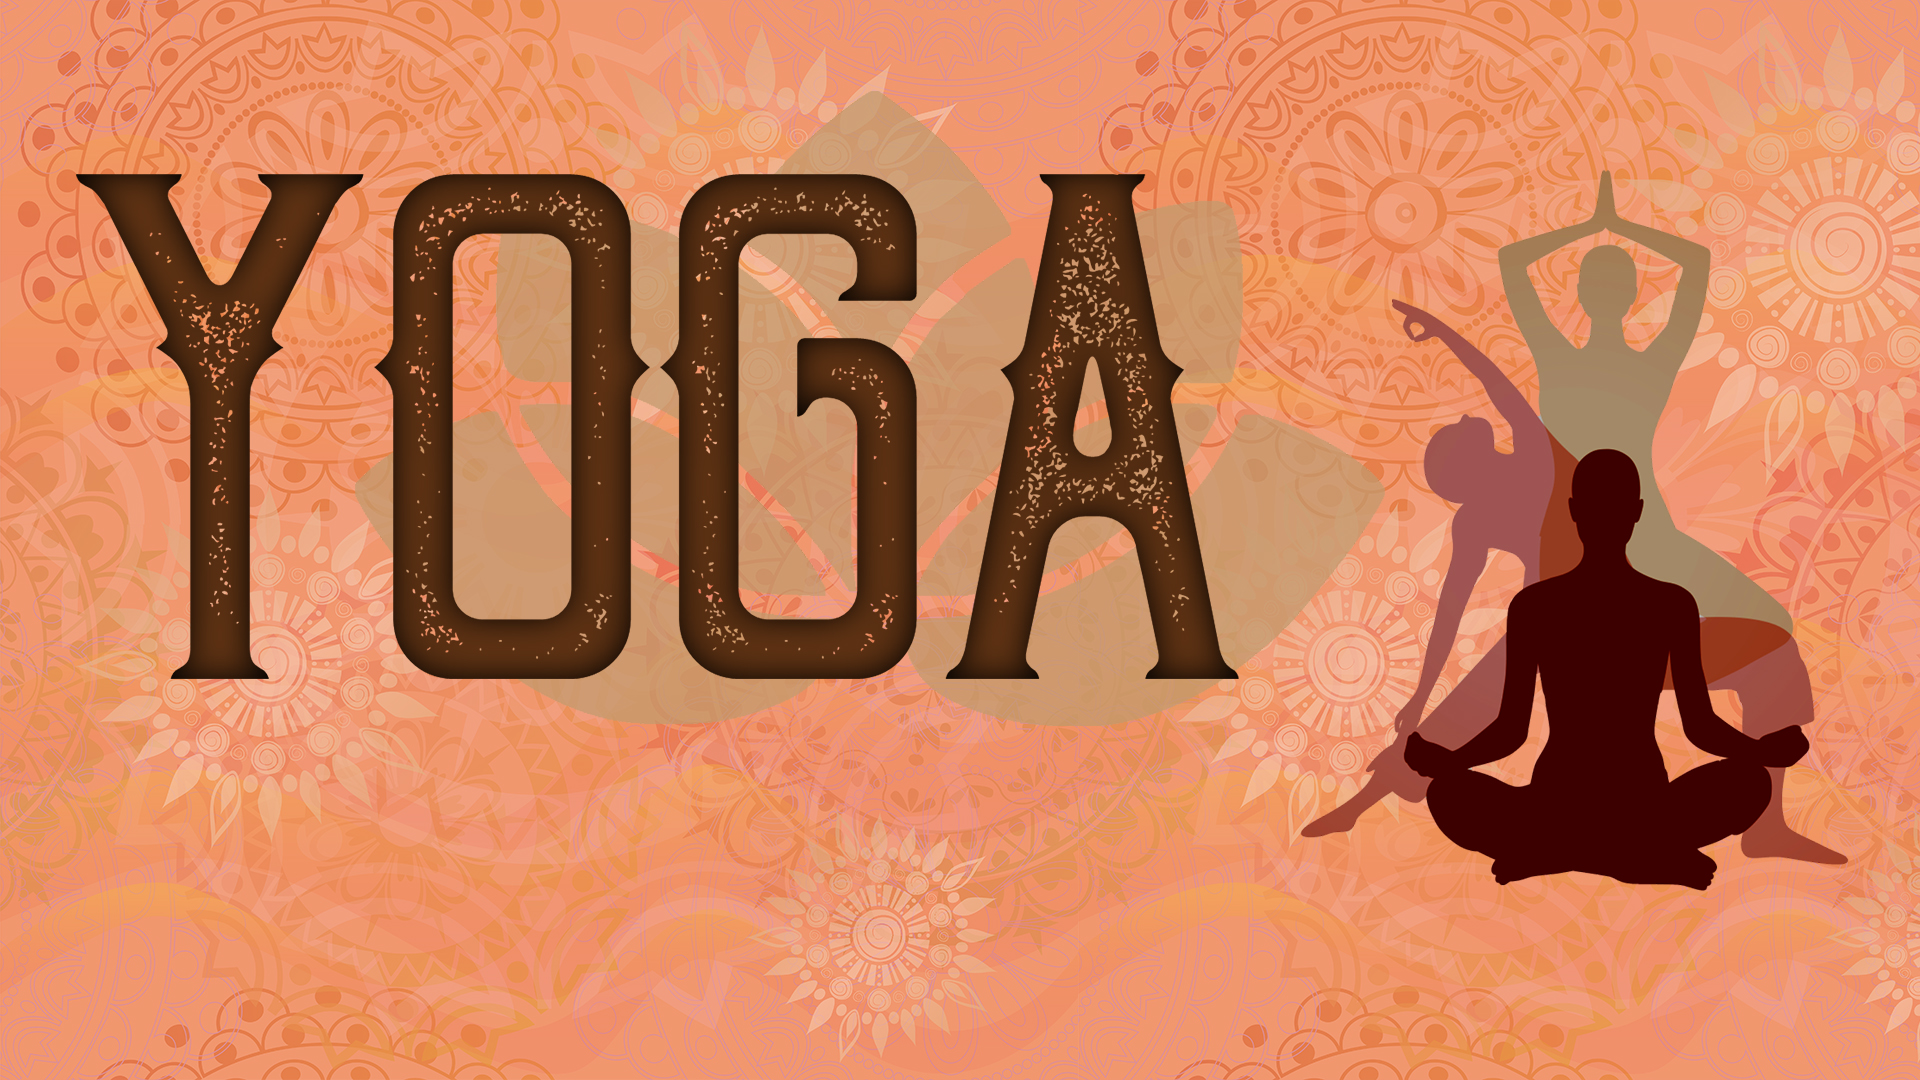 Image text read "YOGA" in brown font over a decorative coral background. To the right, silhouettes of people in different poses are layered on top of each other in shades of brown and mauve.